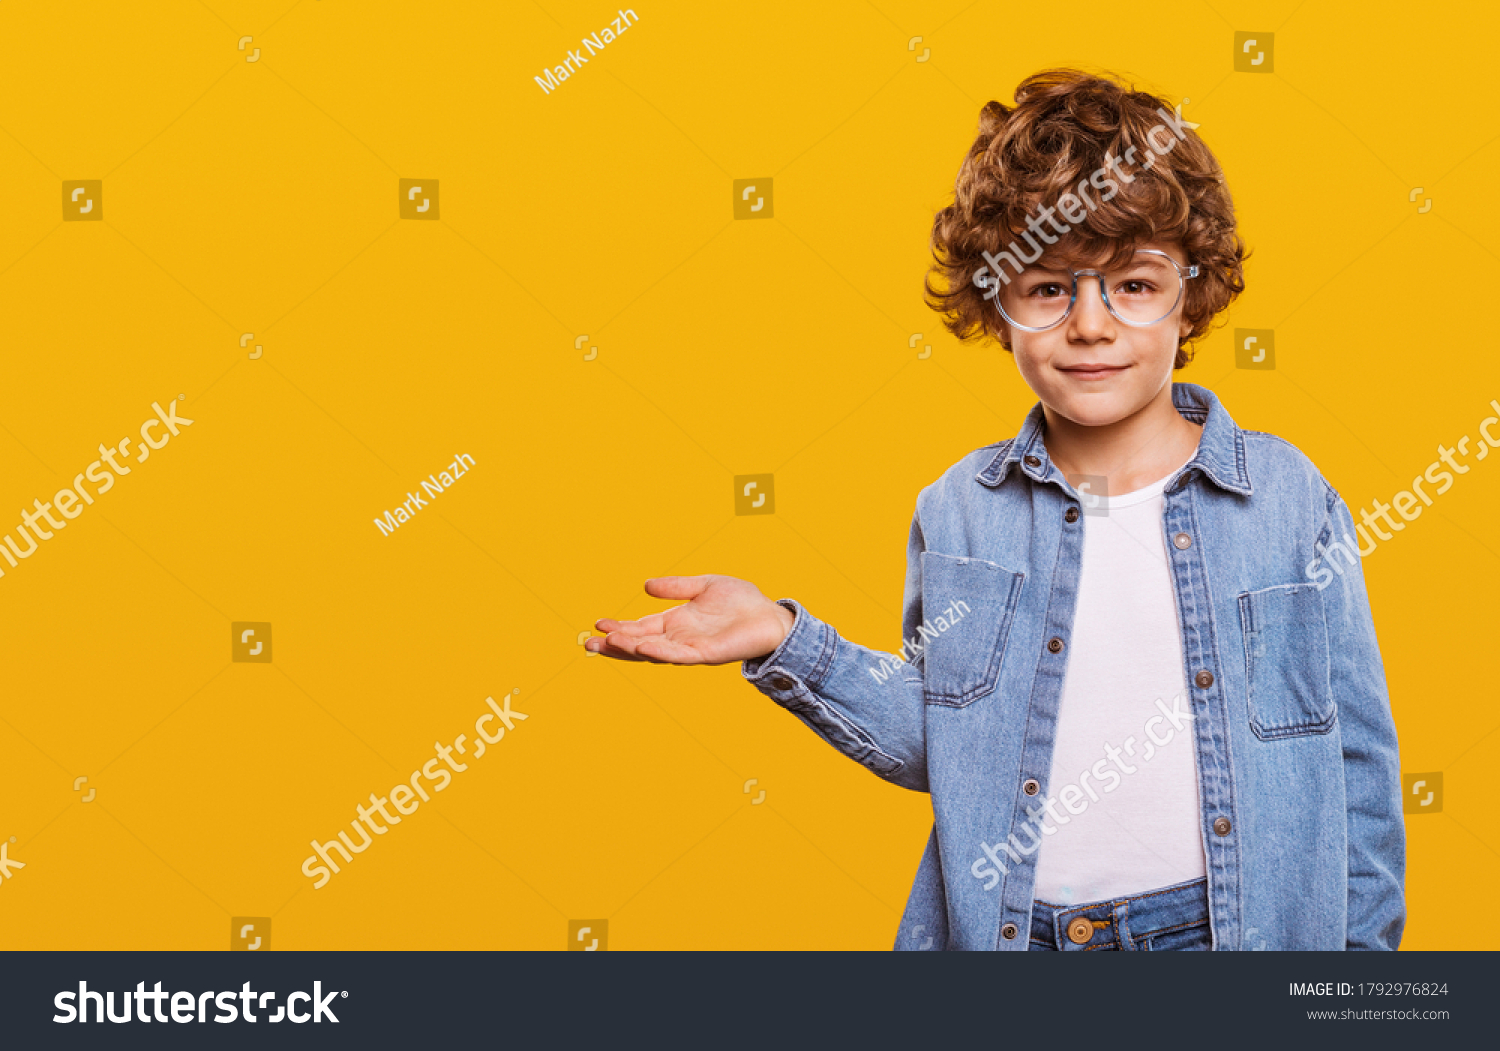 Cute child in denim shirt and glasses looking at camera and pointing at blank space isolated on yellow background #1792976824